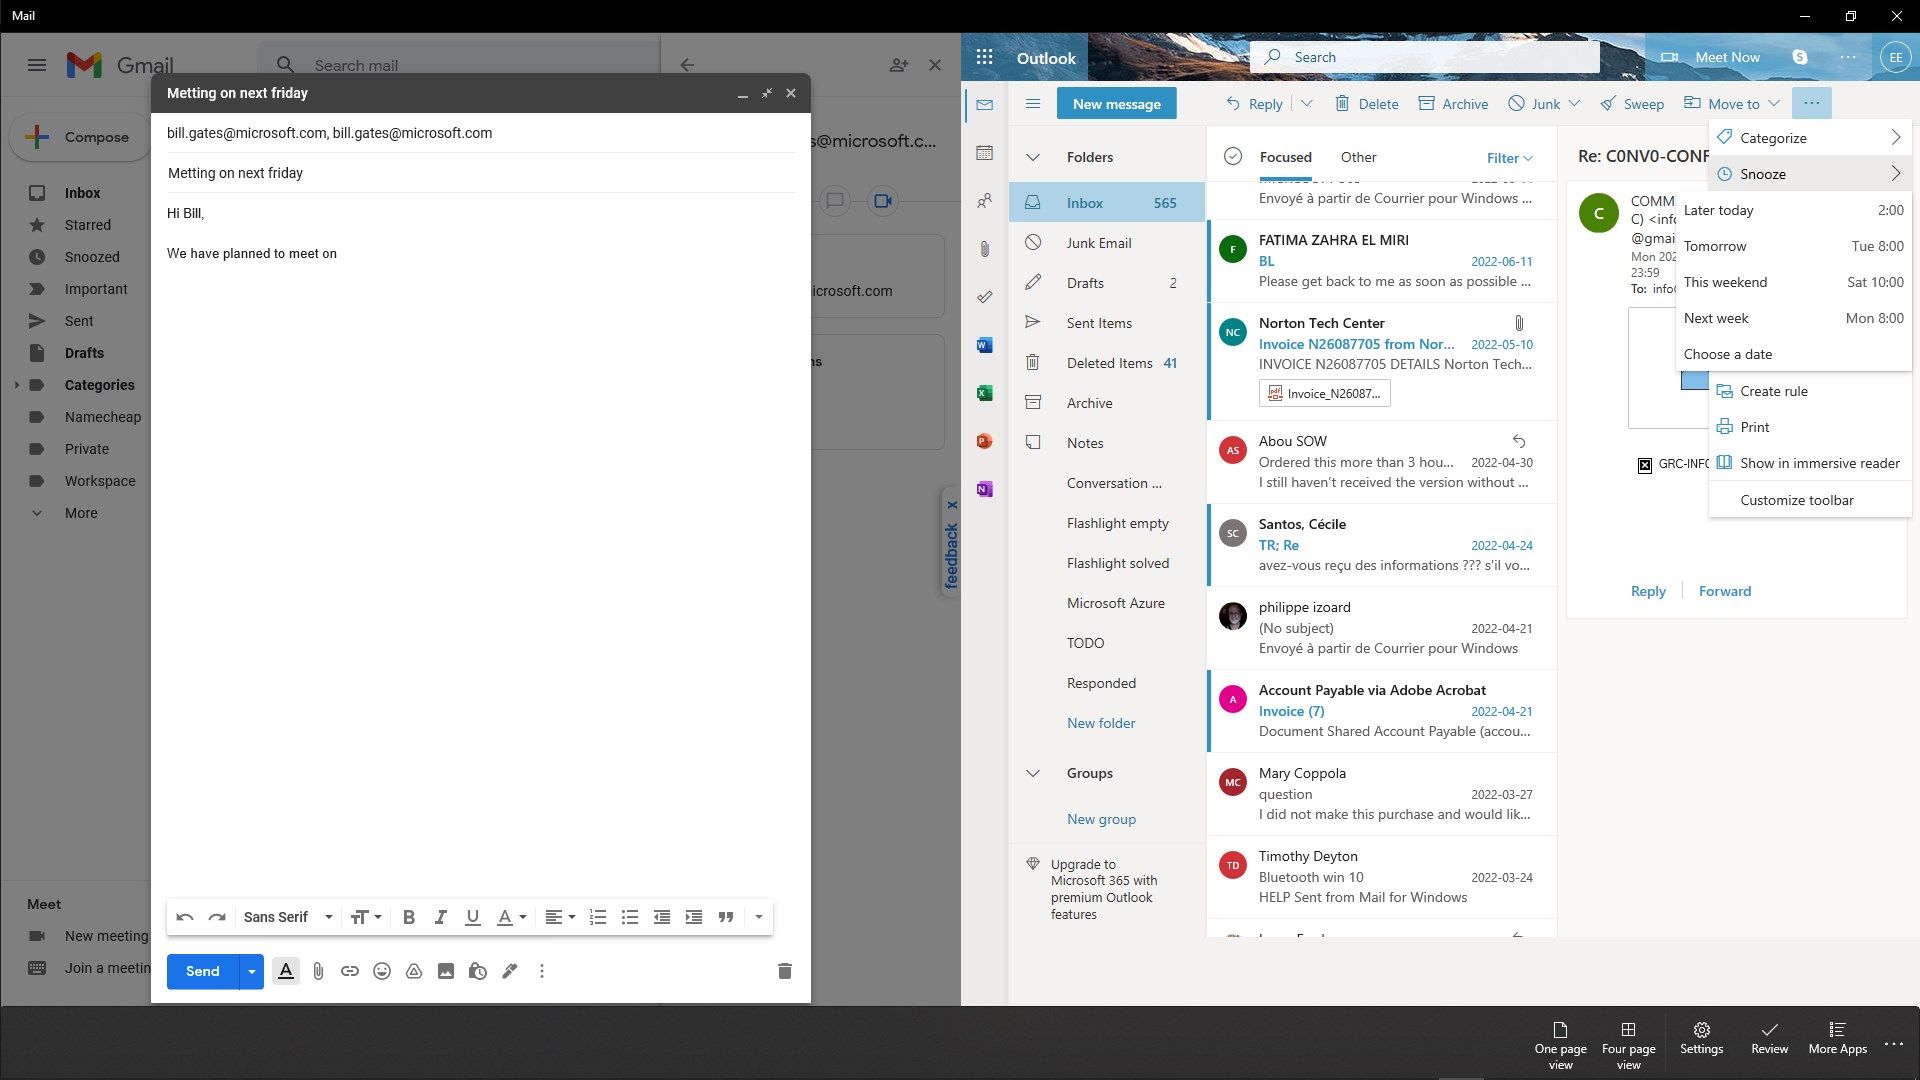 Two page split view mode with Gmail and Outlook accounts parallel